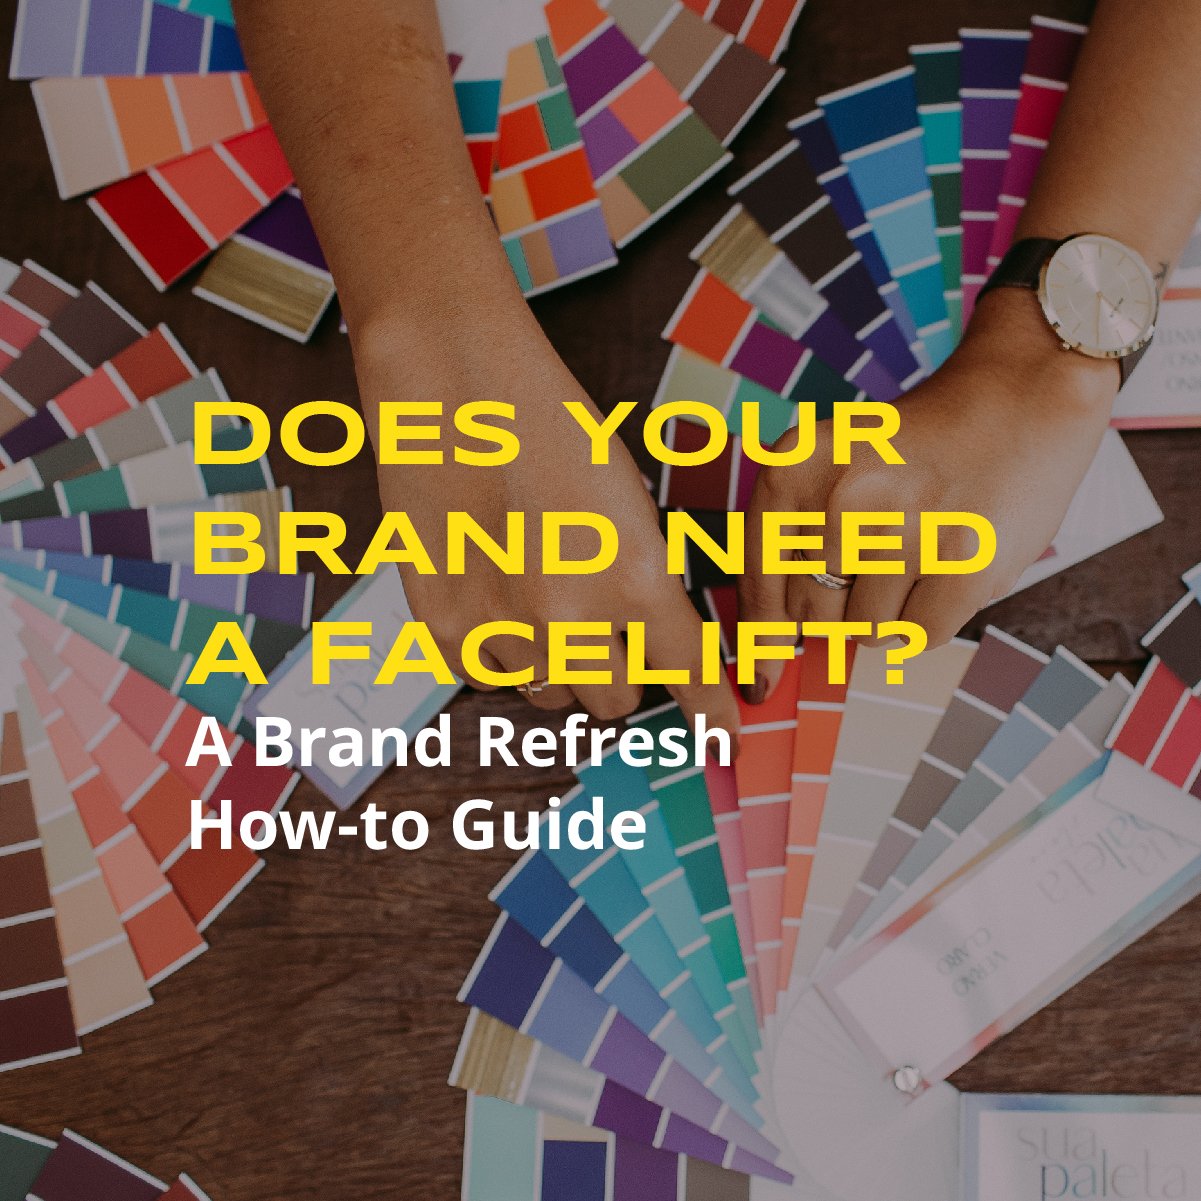 Does your brand need a facelift? Blog image